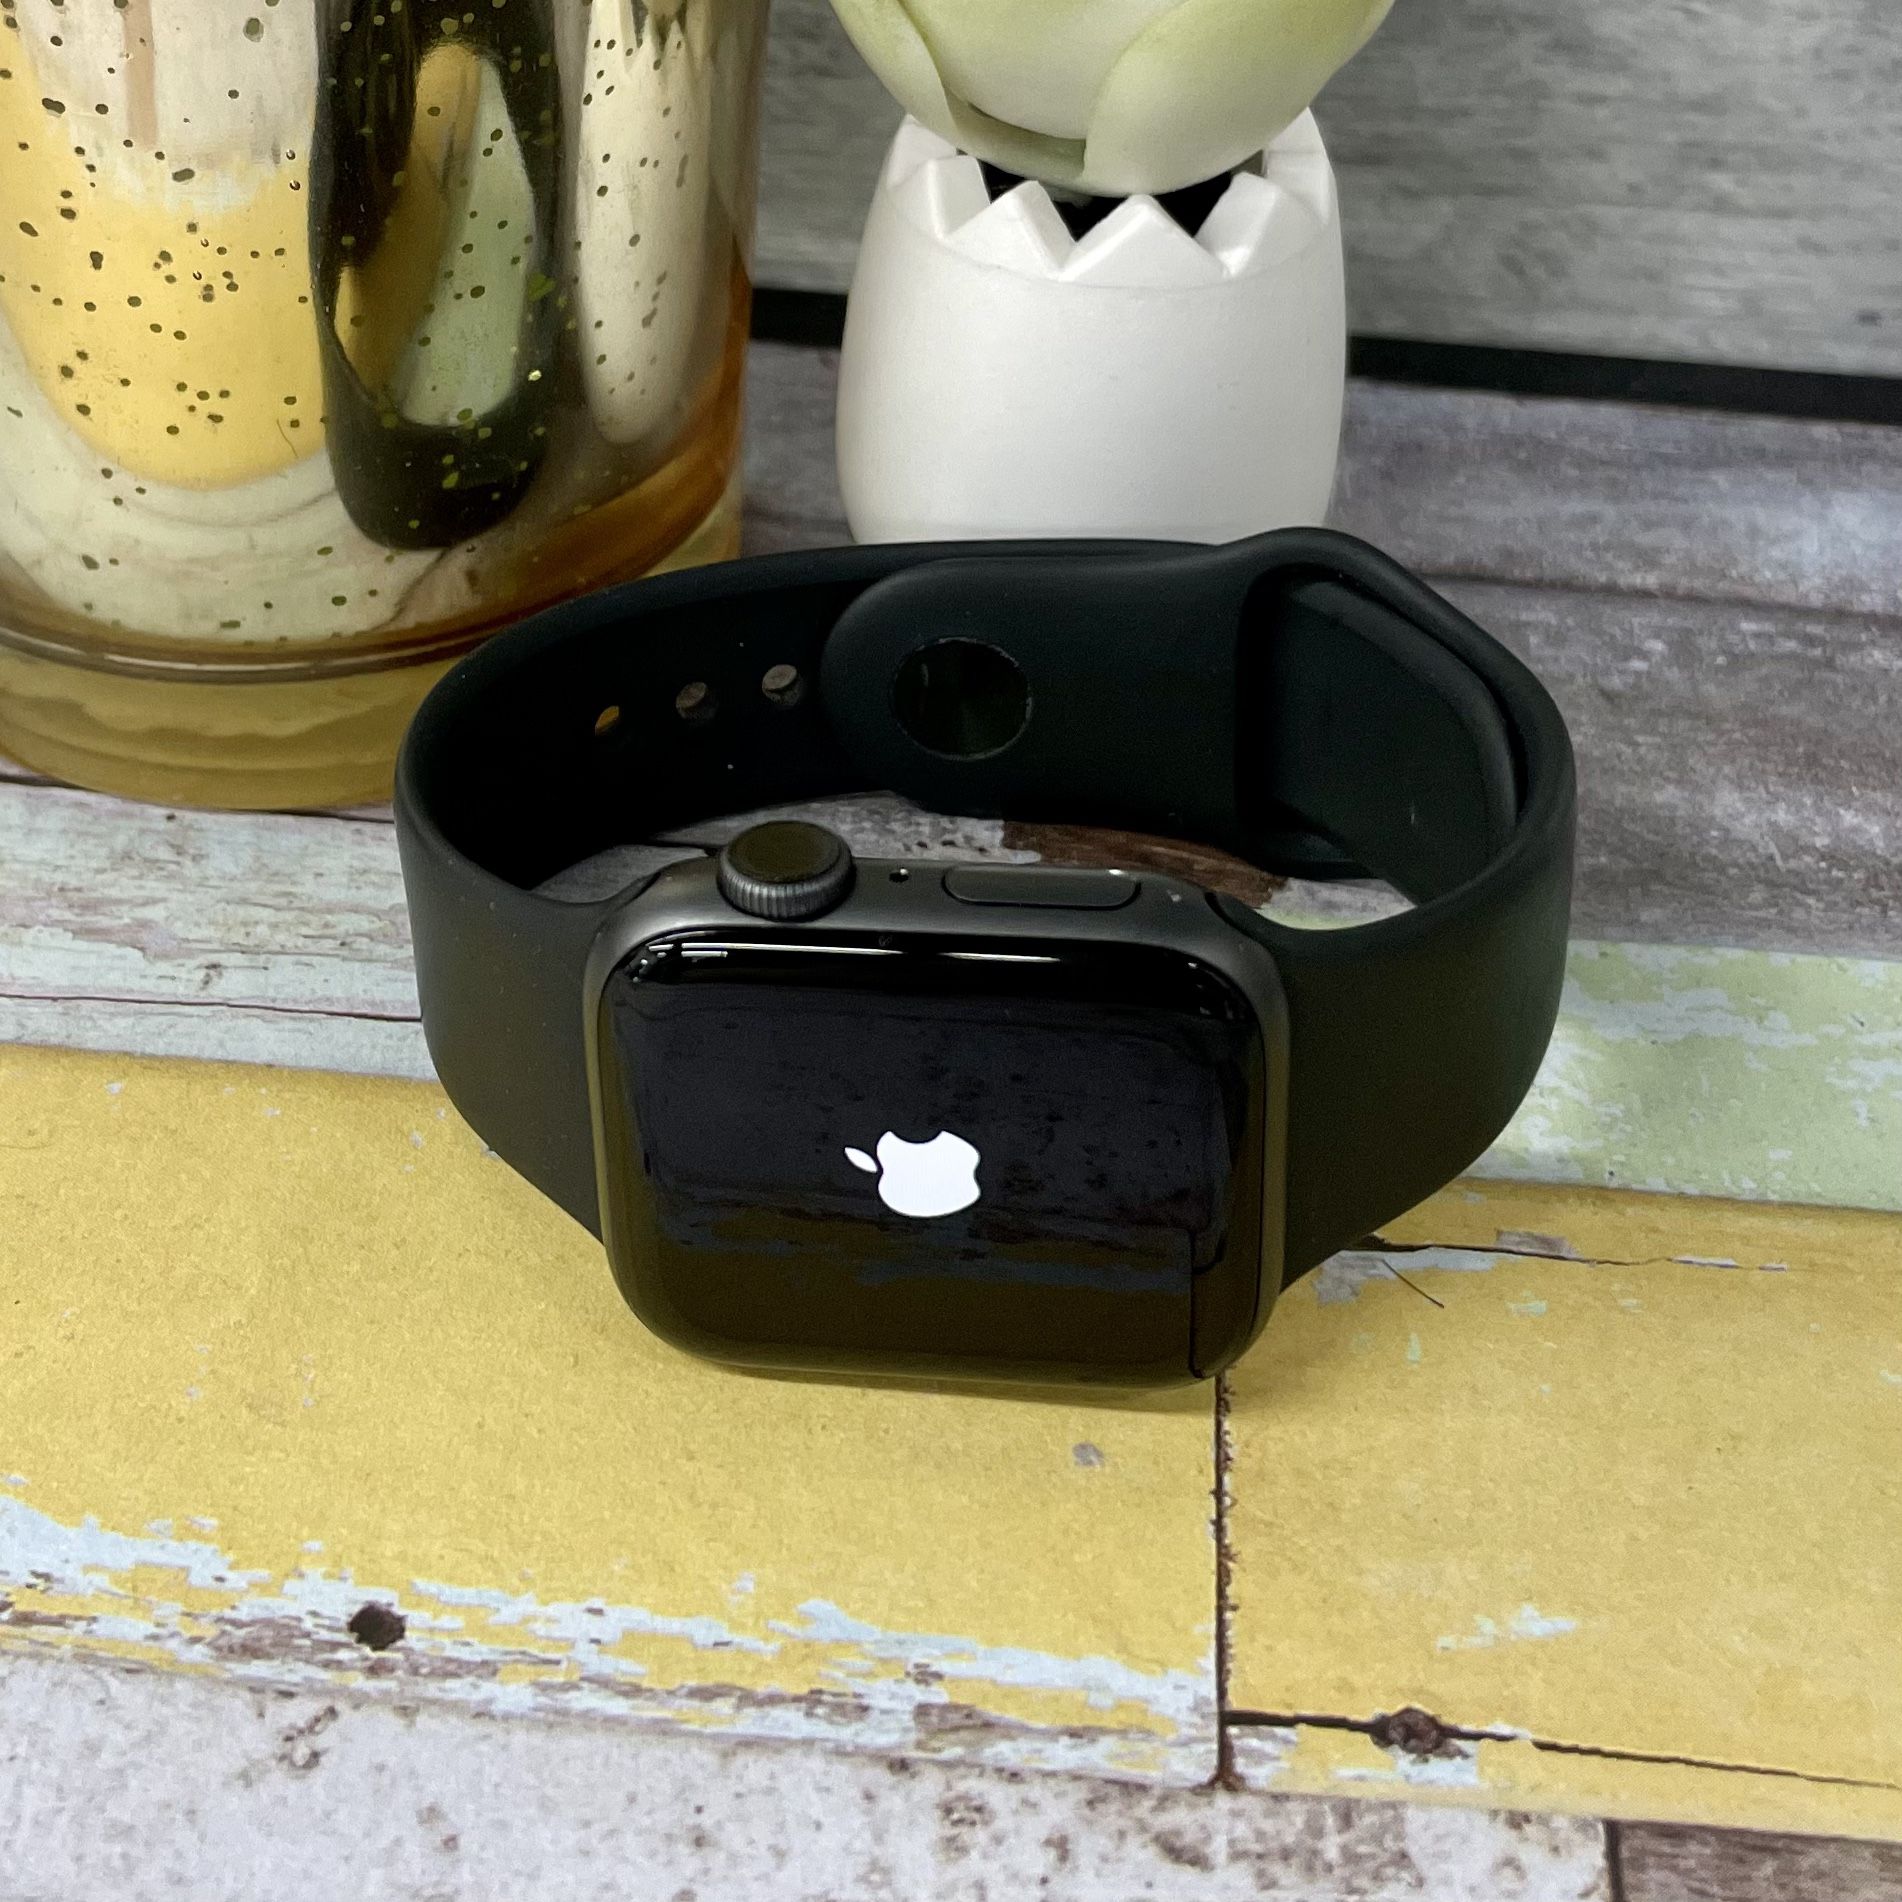 Apple Watch Series 4 (Payments/Trade In Available)